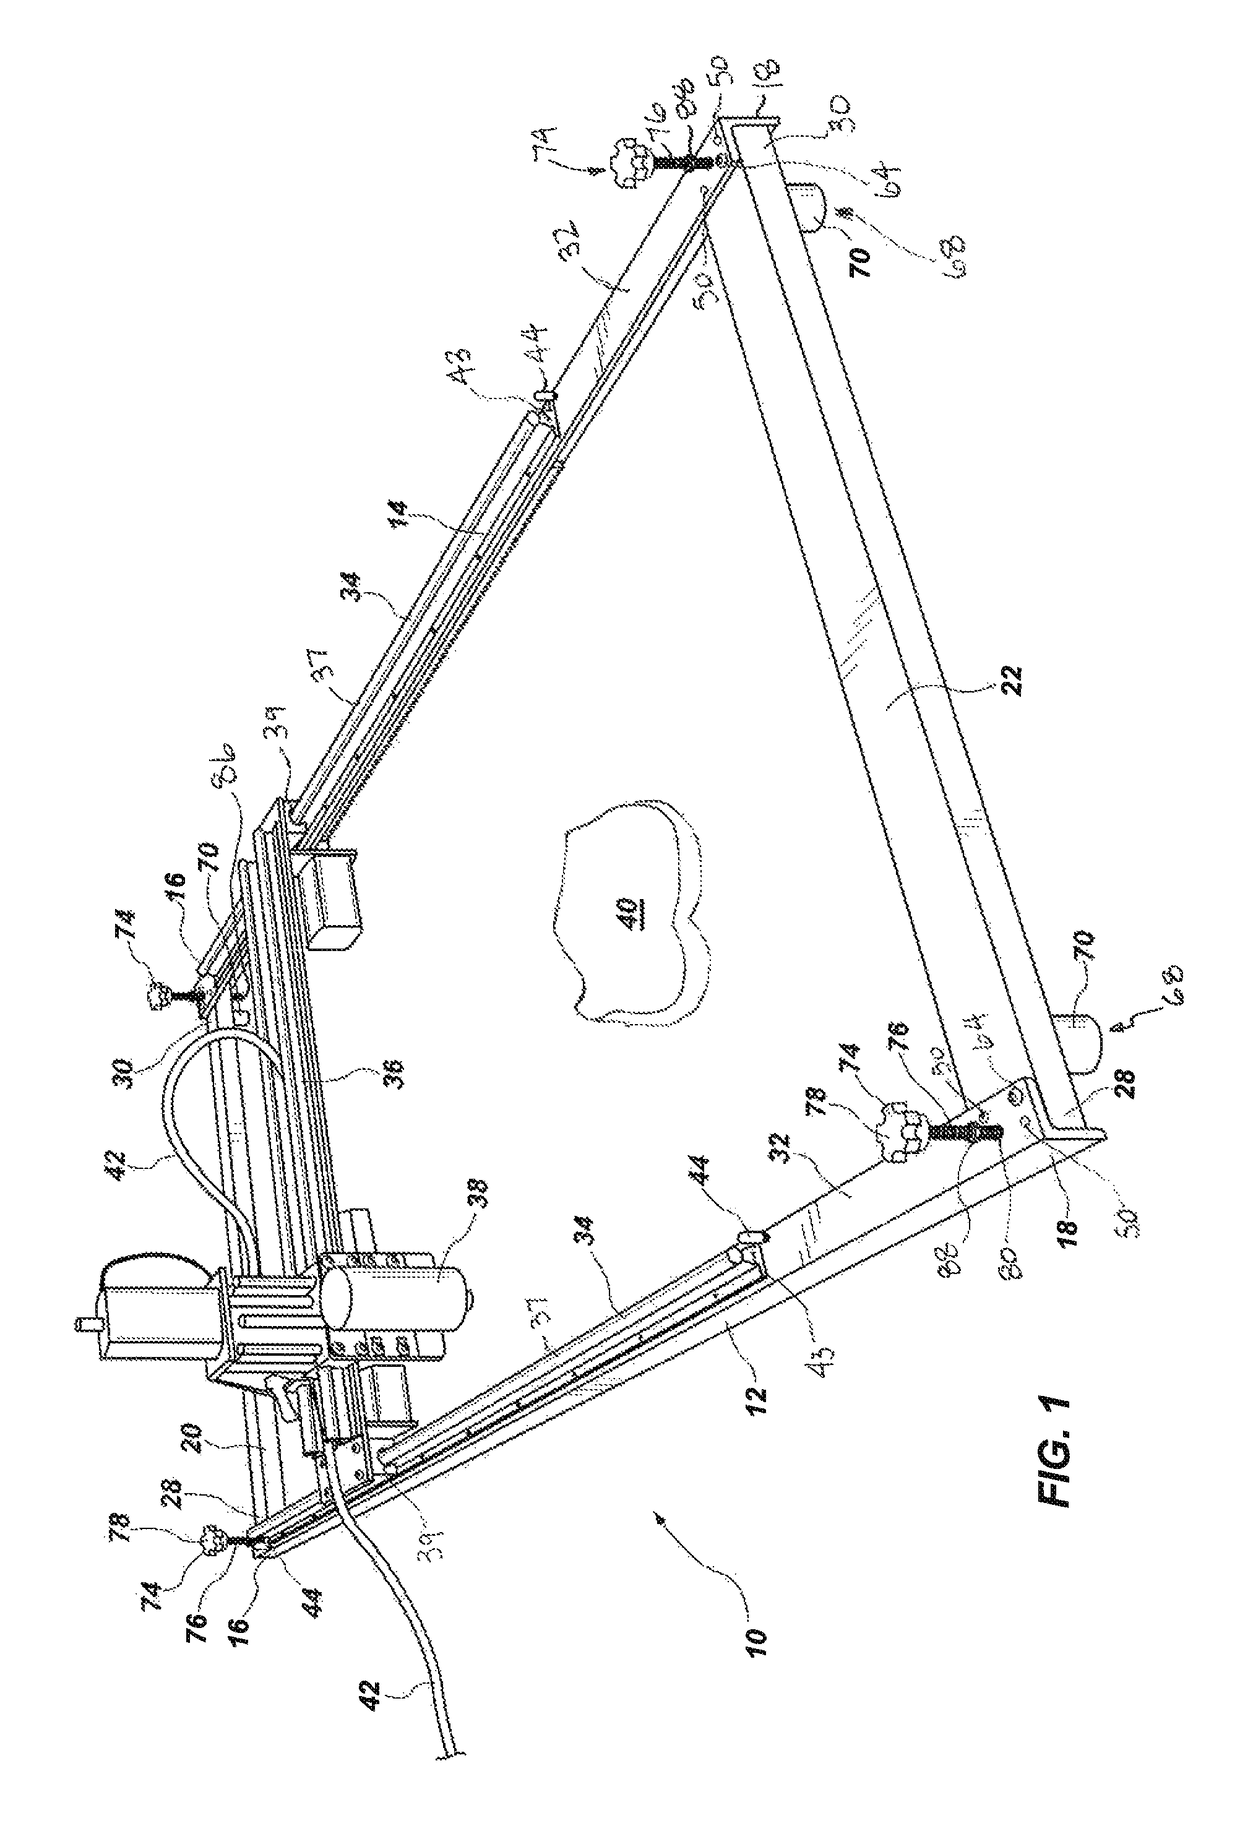 Portable rail system for mounting an engraving device